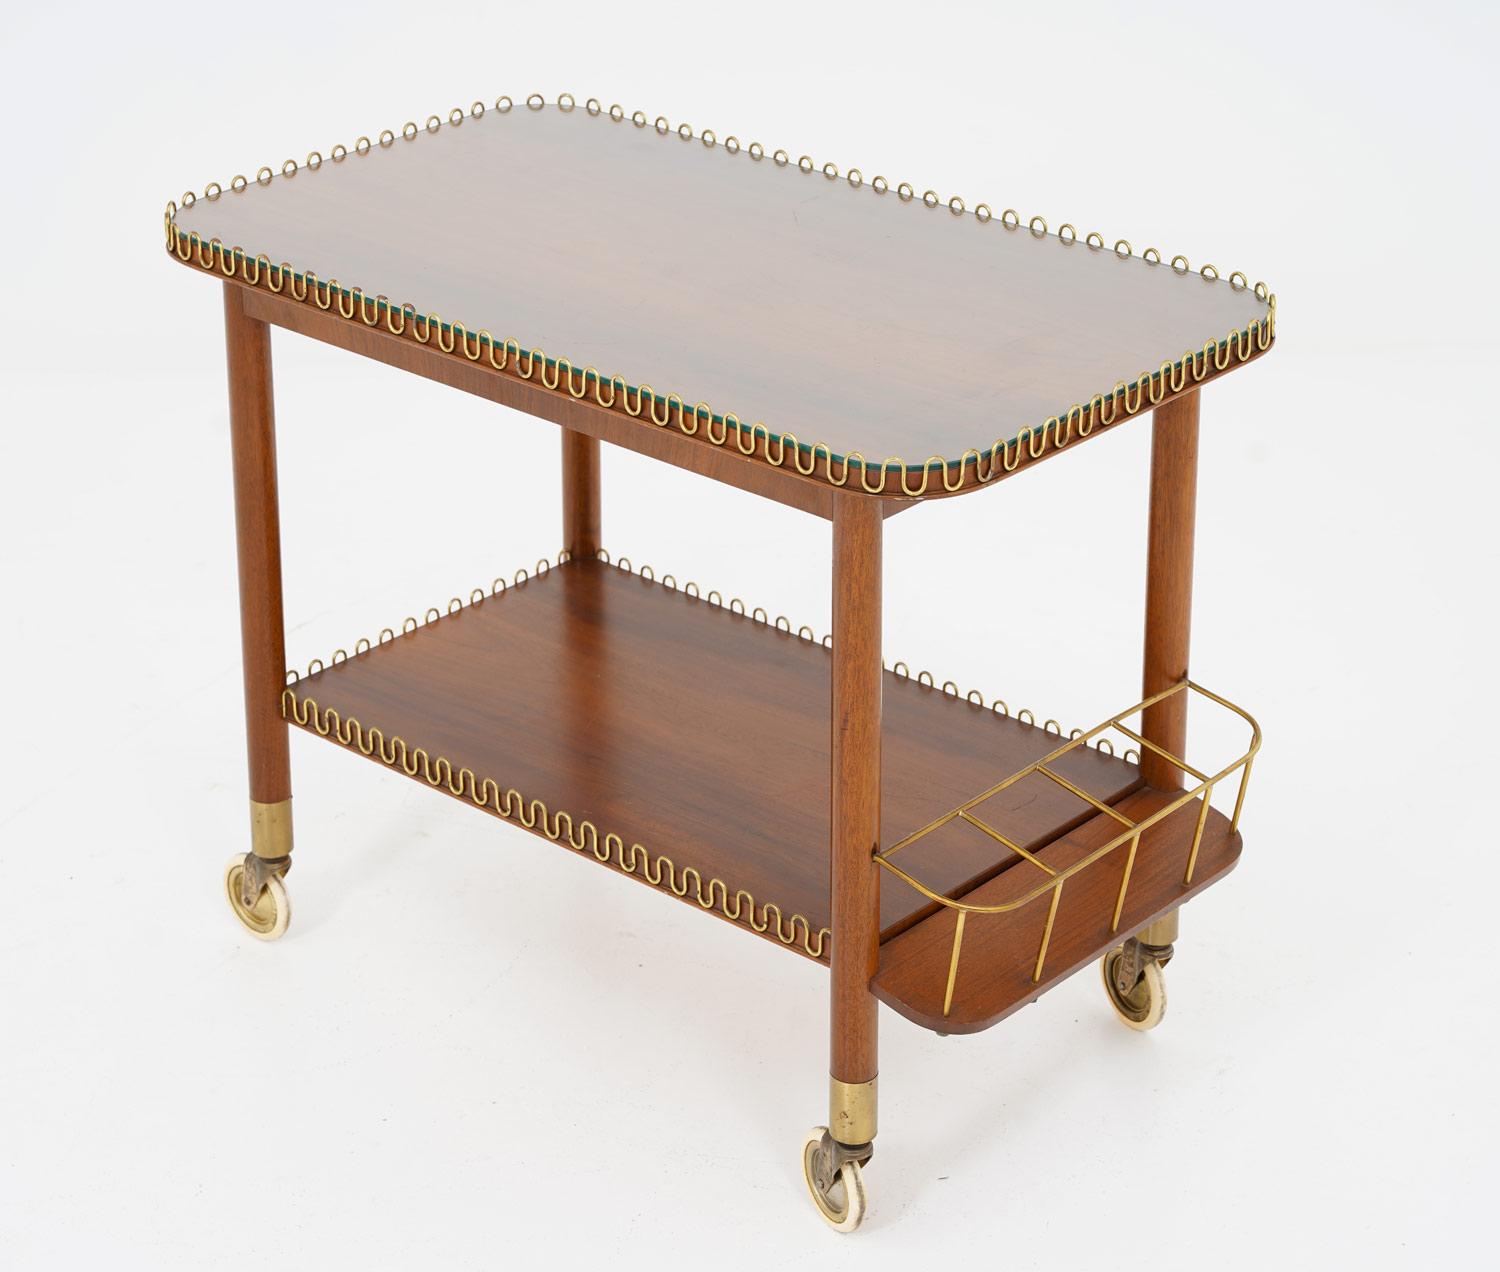 Beautiful design and well matched materials make this piece a good fit in a modern home. It consists of a frame in mahogany with beautiful details in brass and a glass table top.

Condition: Very good original condition.